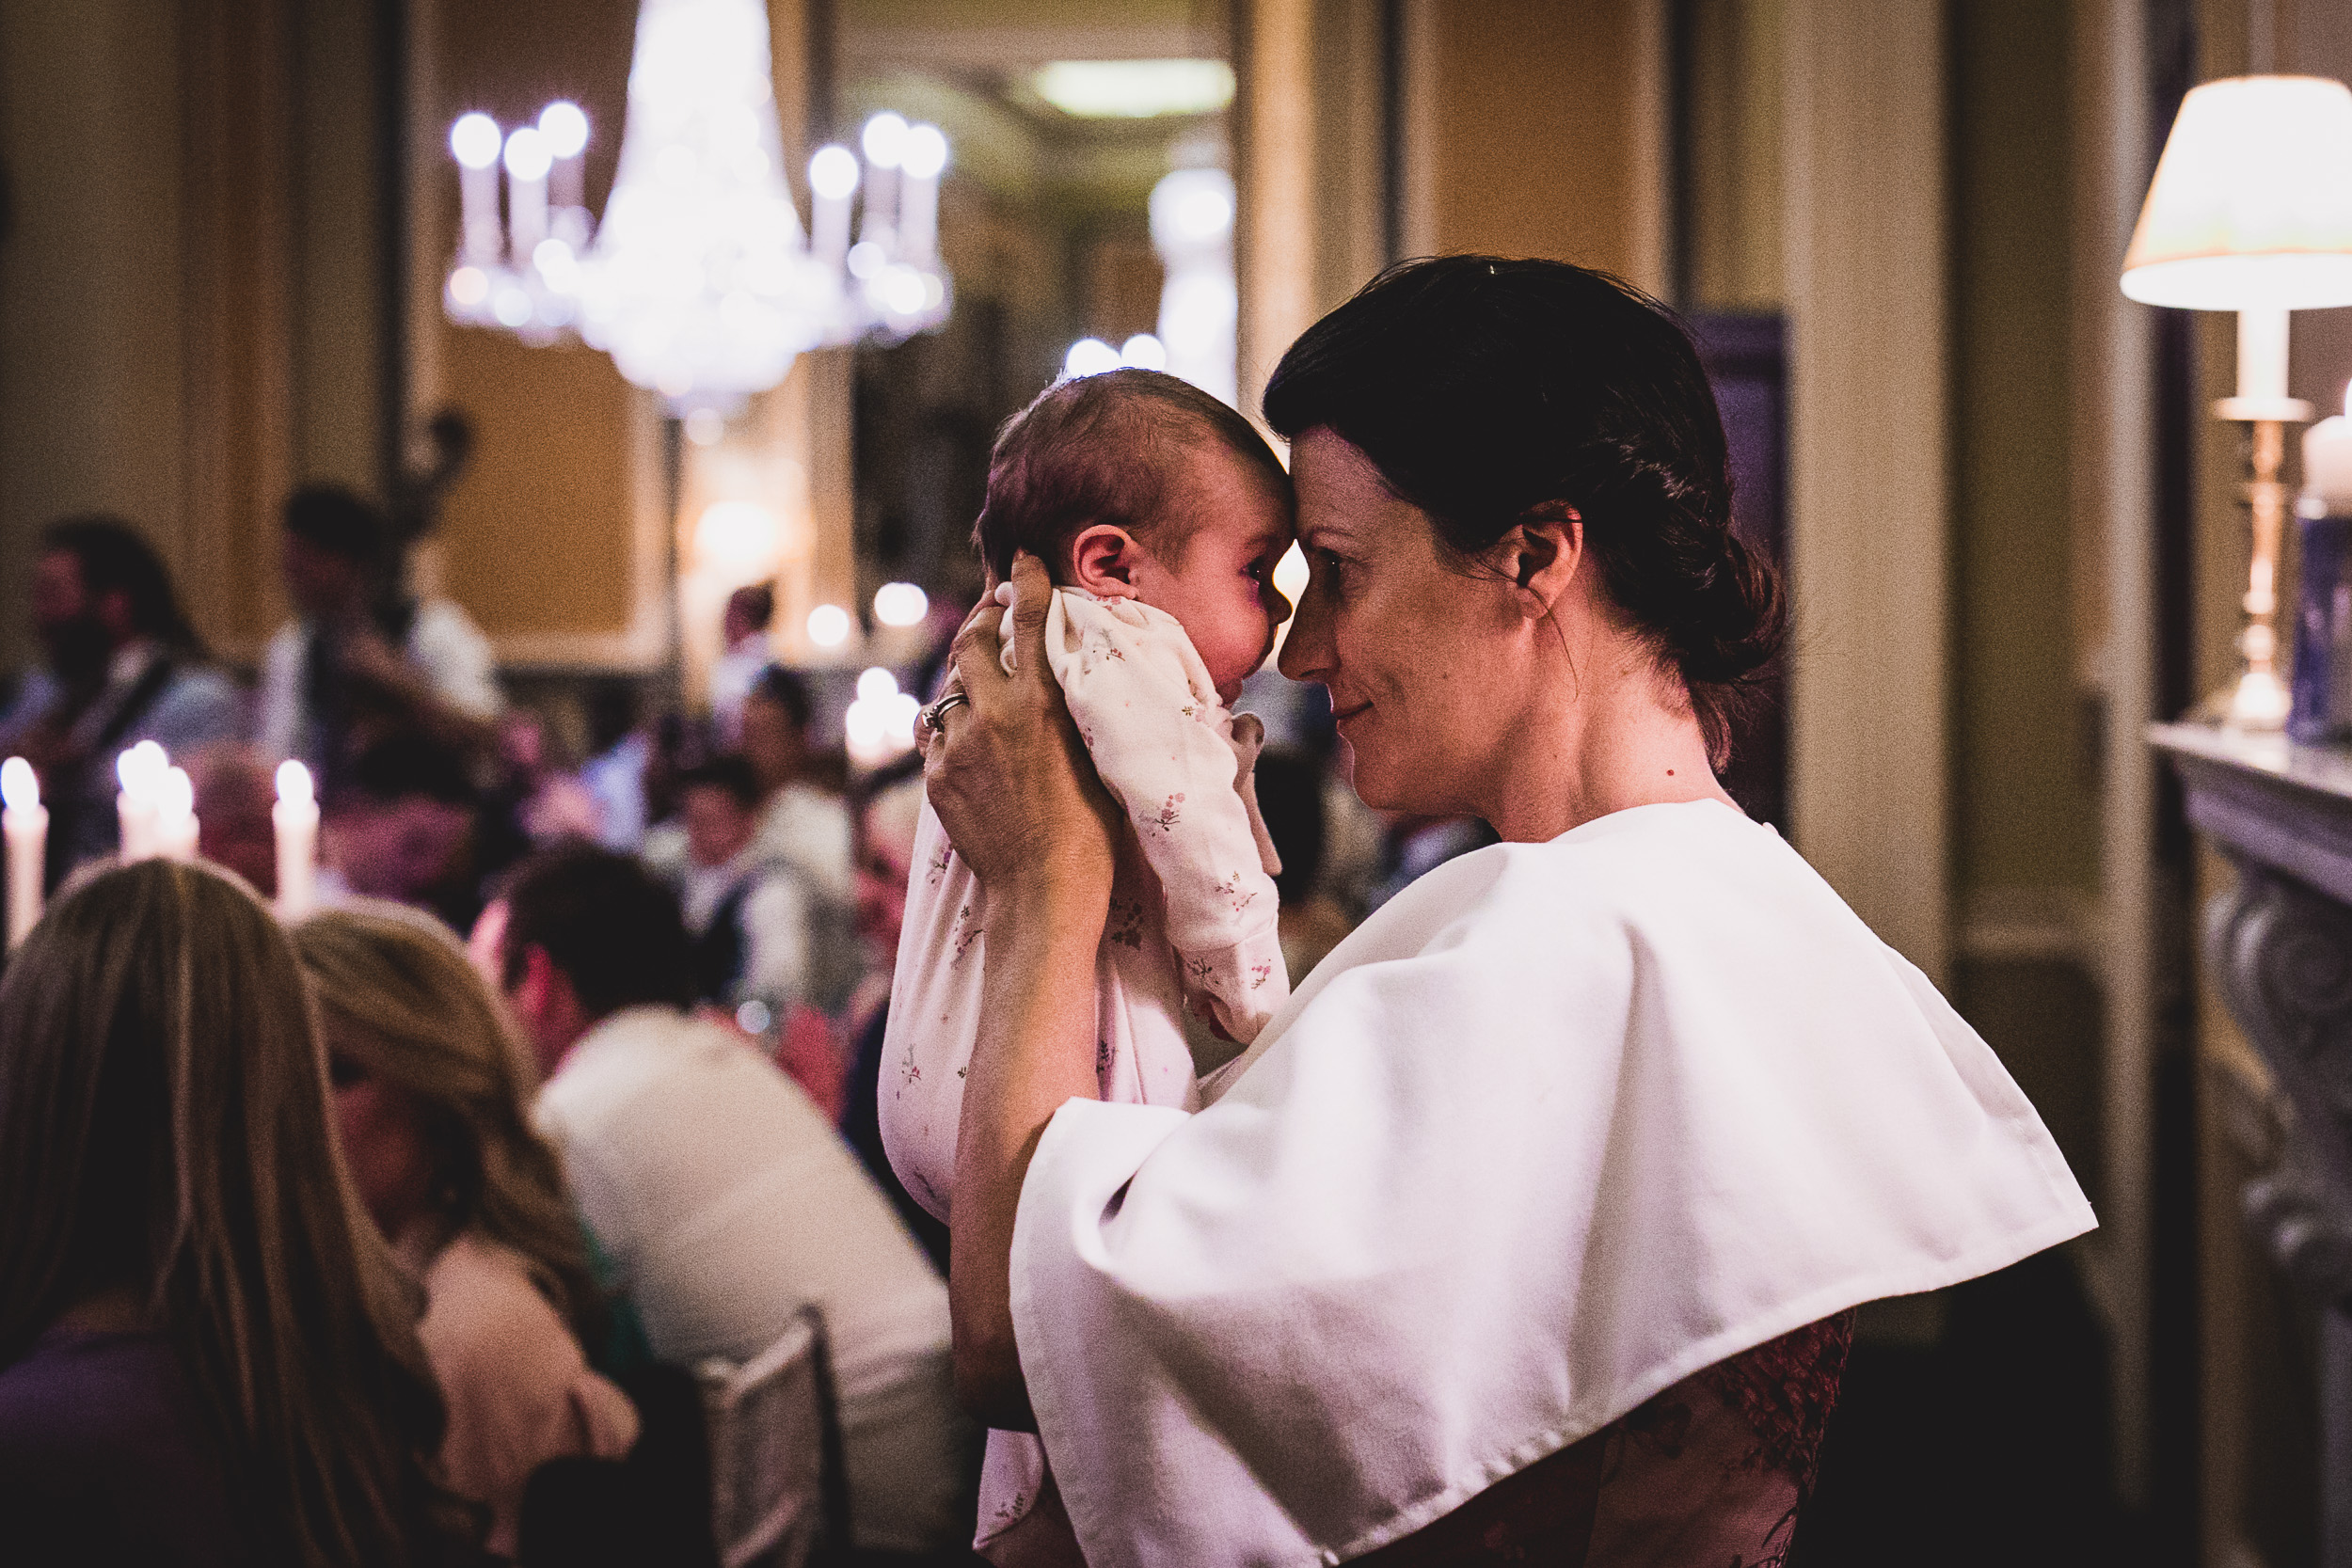 A wedding photographer captures a woman holding a baby in the midst of a crowded room.